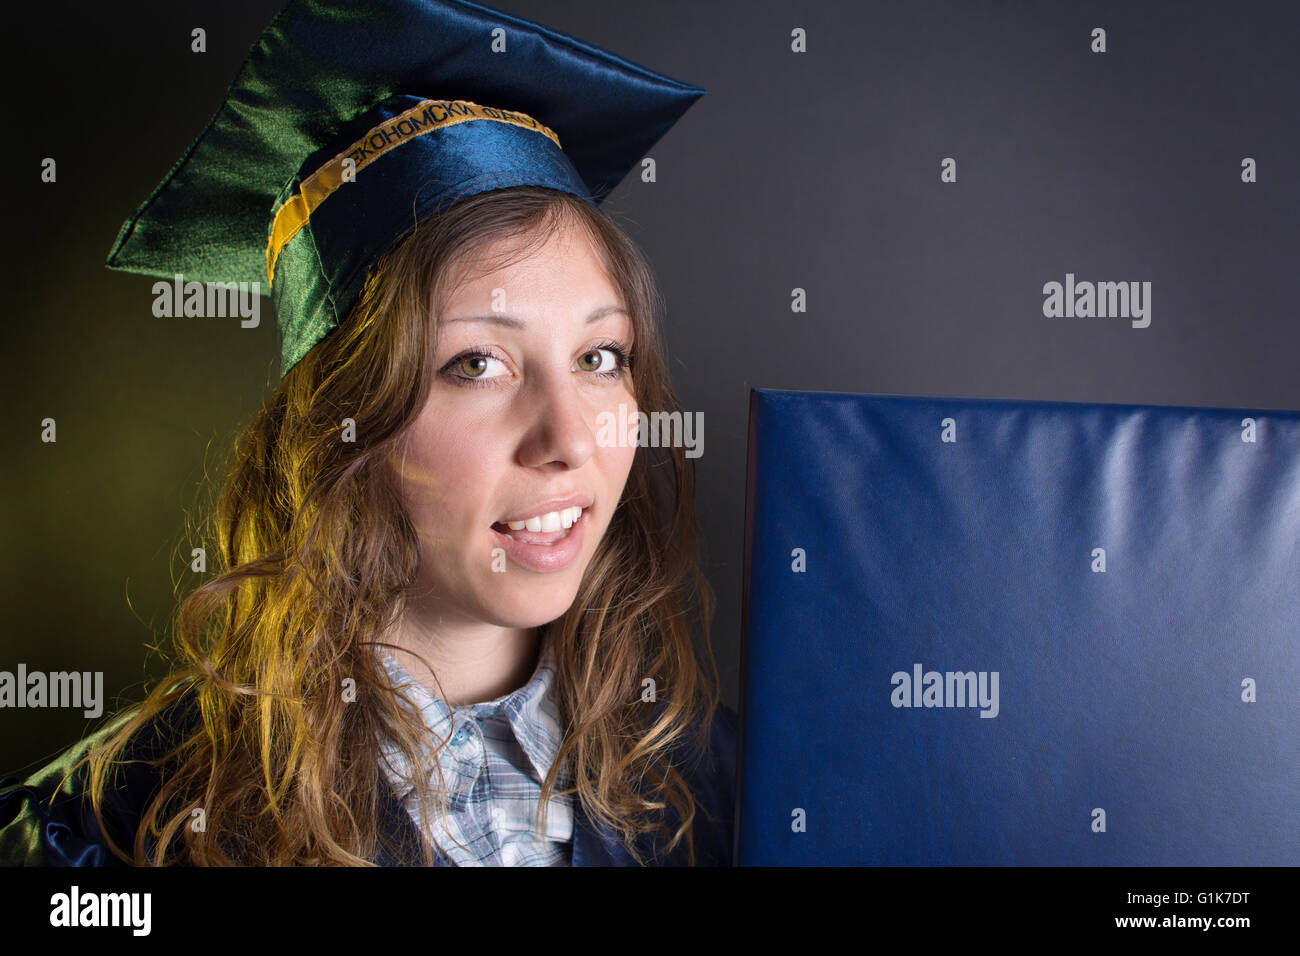 Brunette girl with a diploma in graduation costume and hat Stock Photo